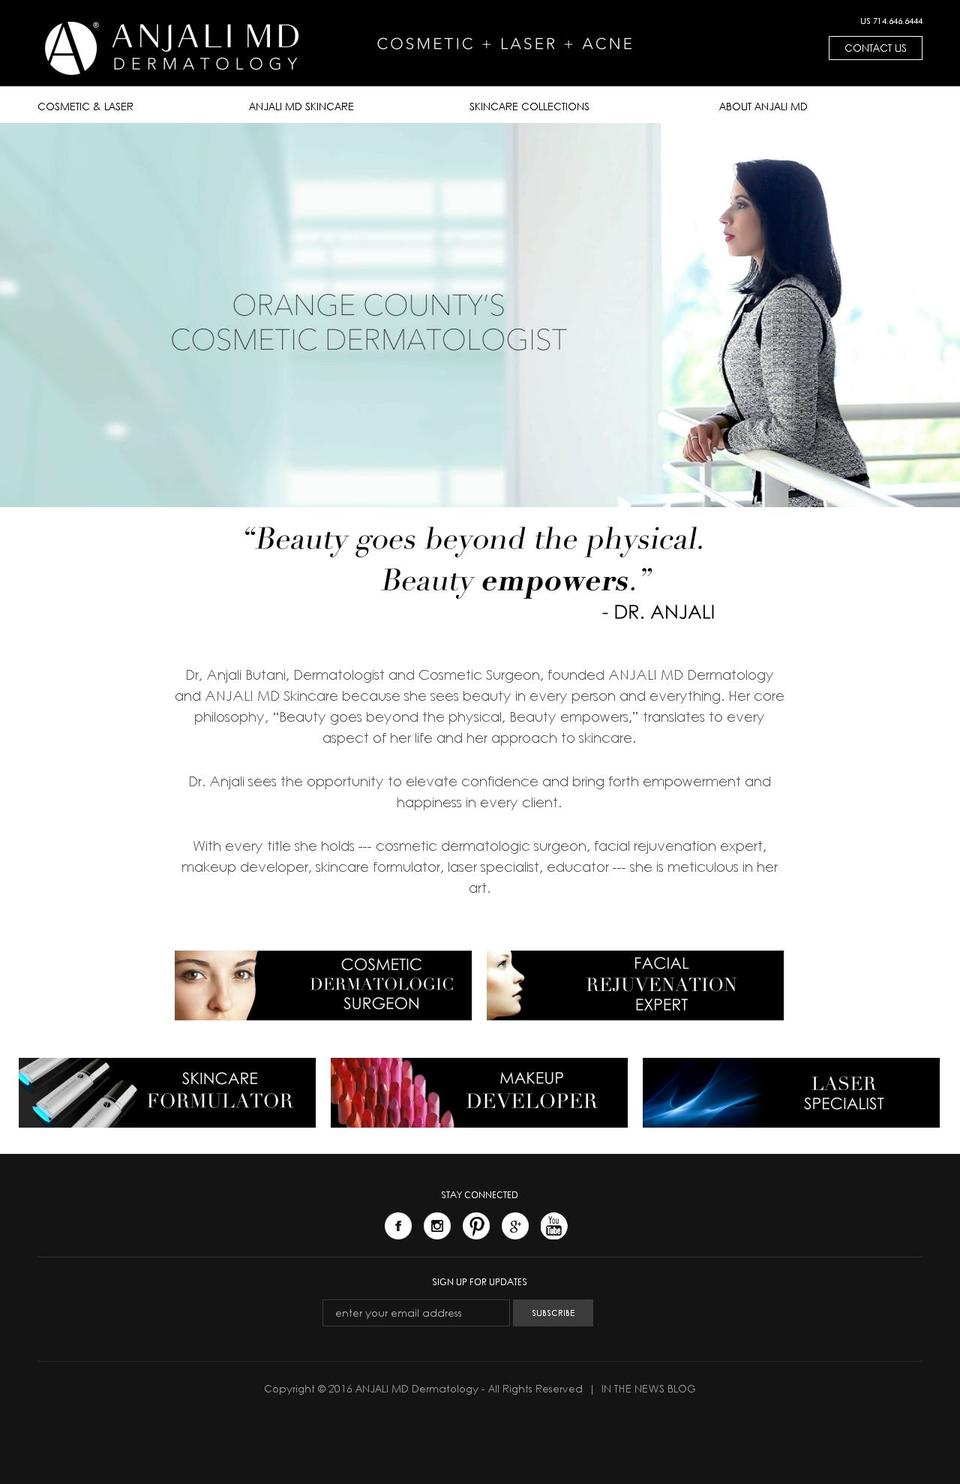 Anjali MD Site 2016 Shopify theme site example ocprecisionlift.org